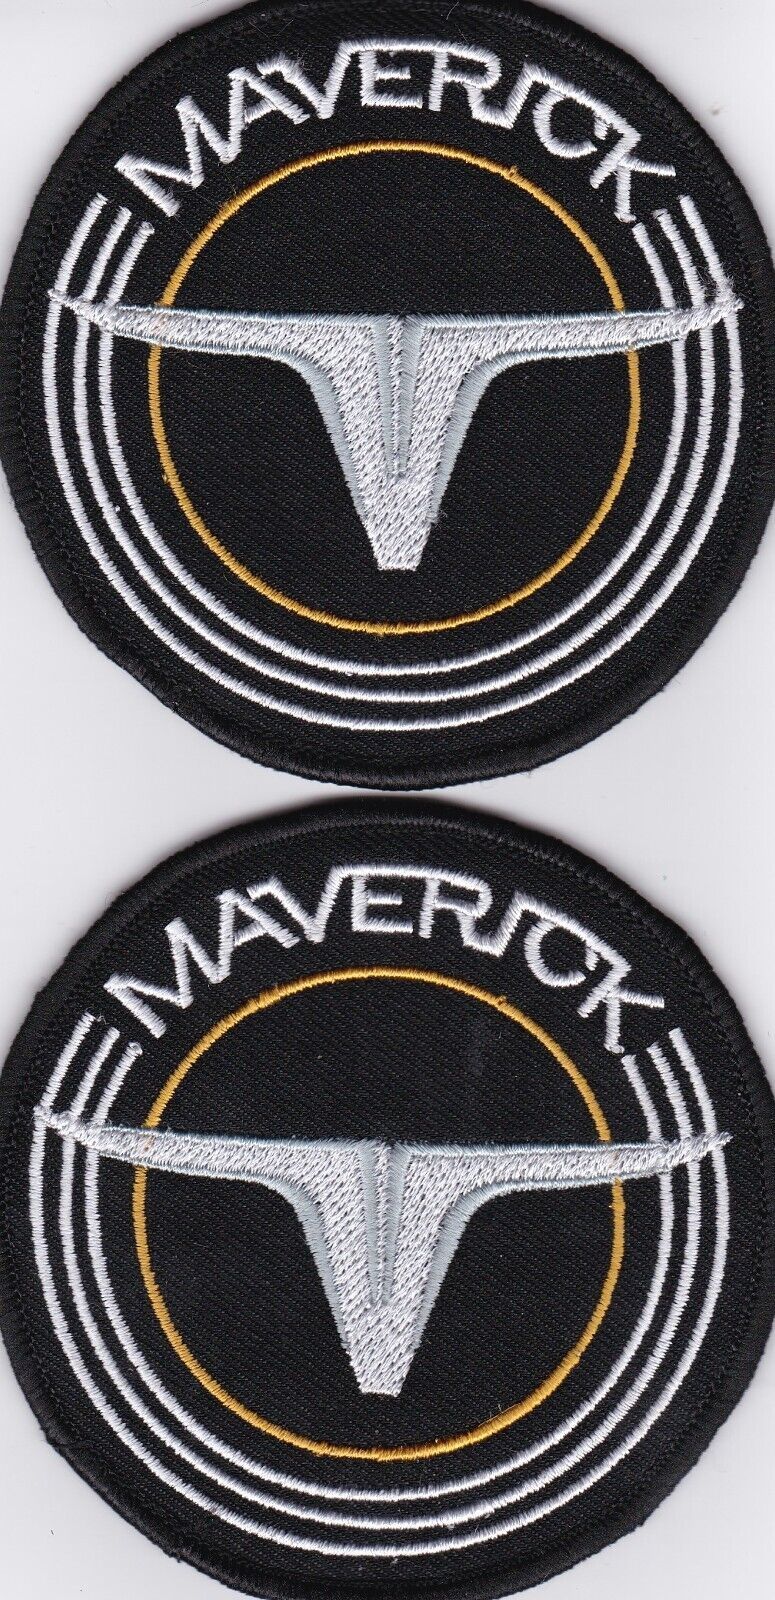 Primary image for 2 FORD MAVERICK SEW/IRON PATCH EMBROIDERED GRABBER TRUCK 3.5 INCH BADGE GAS CAP